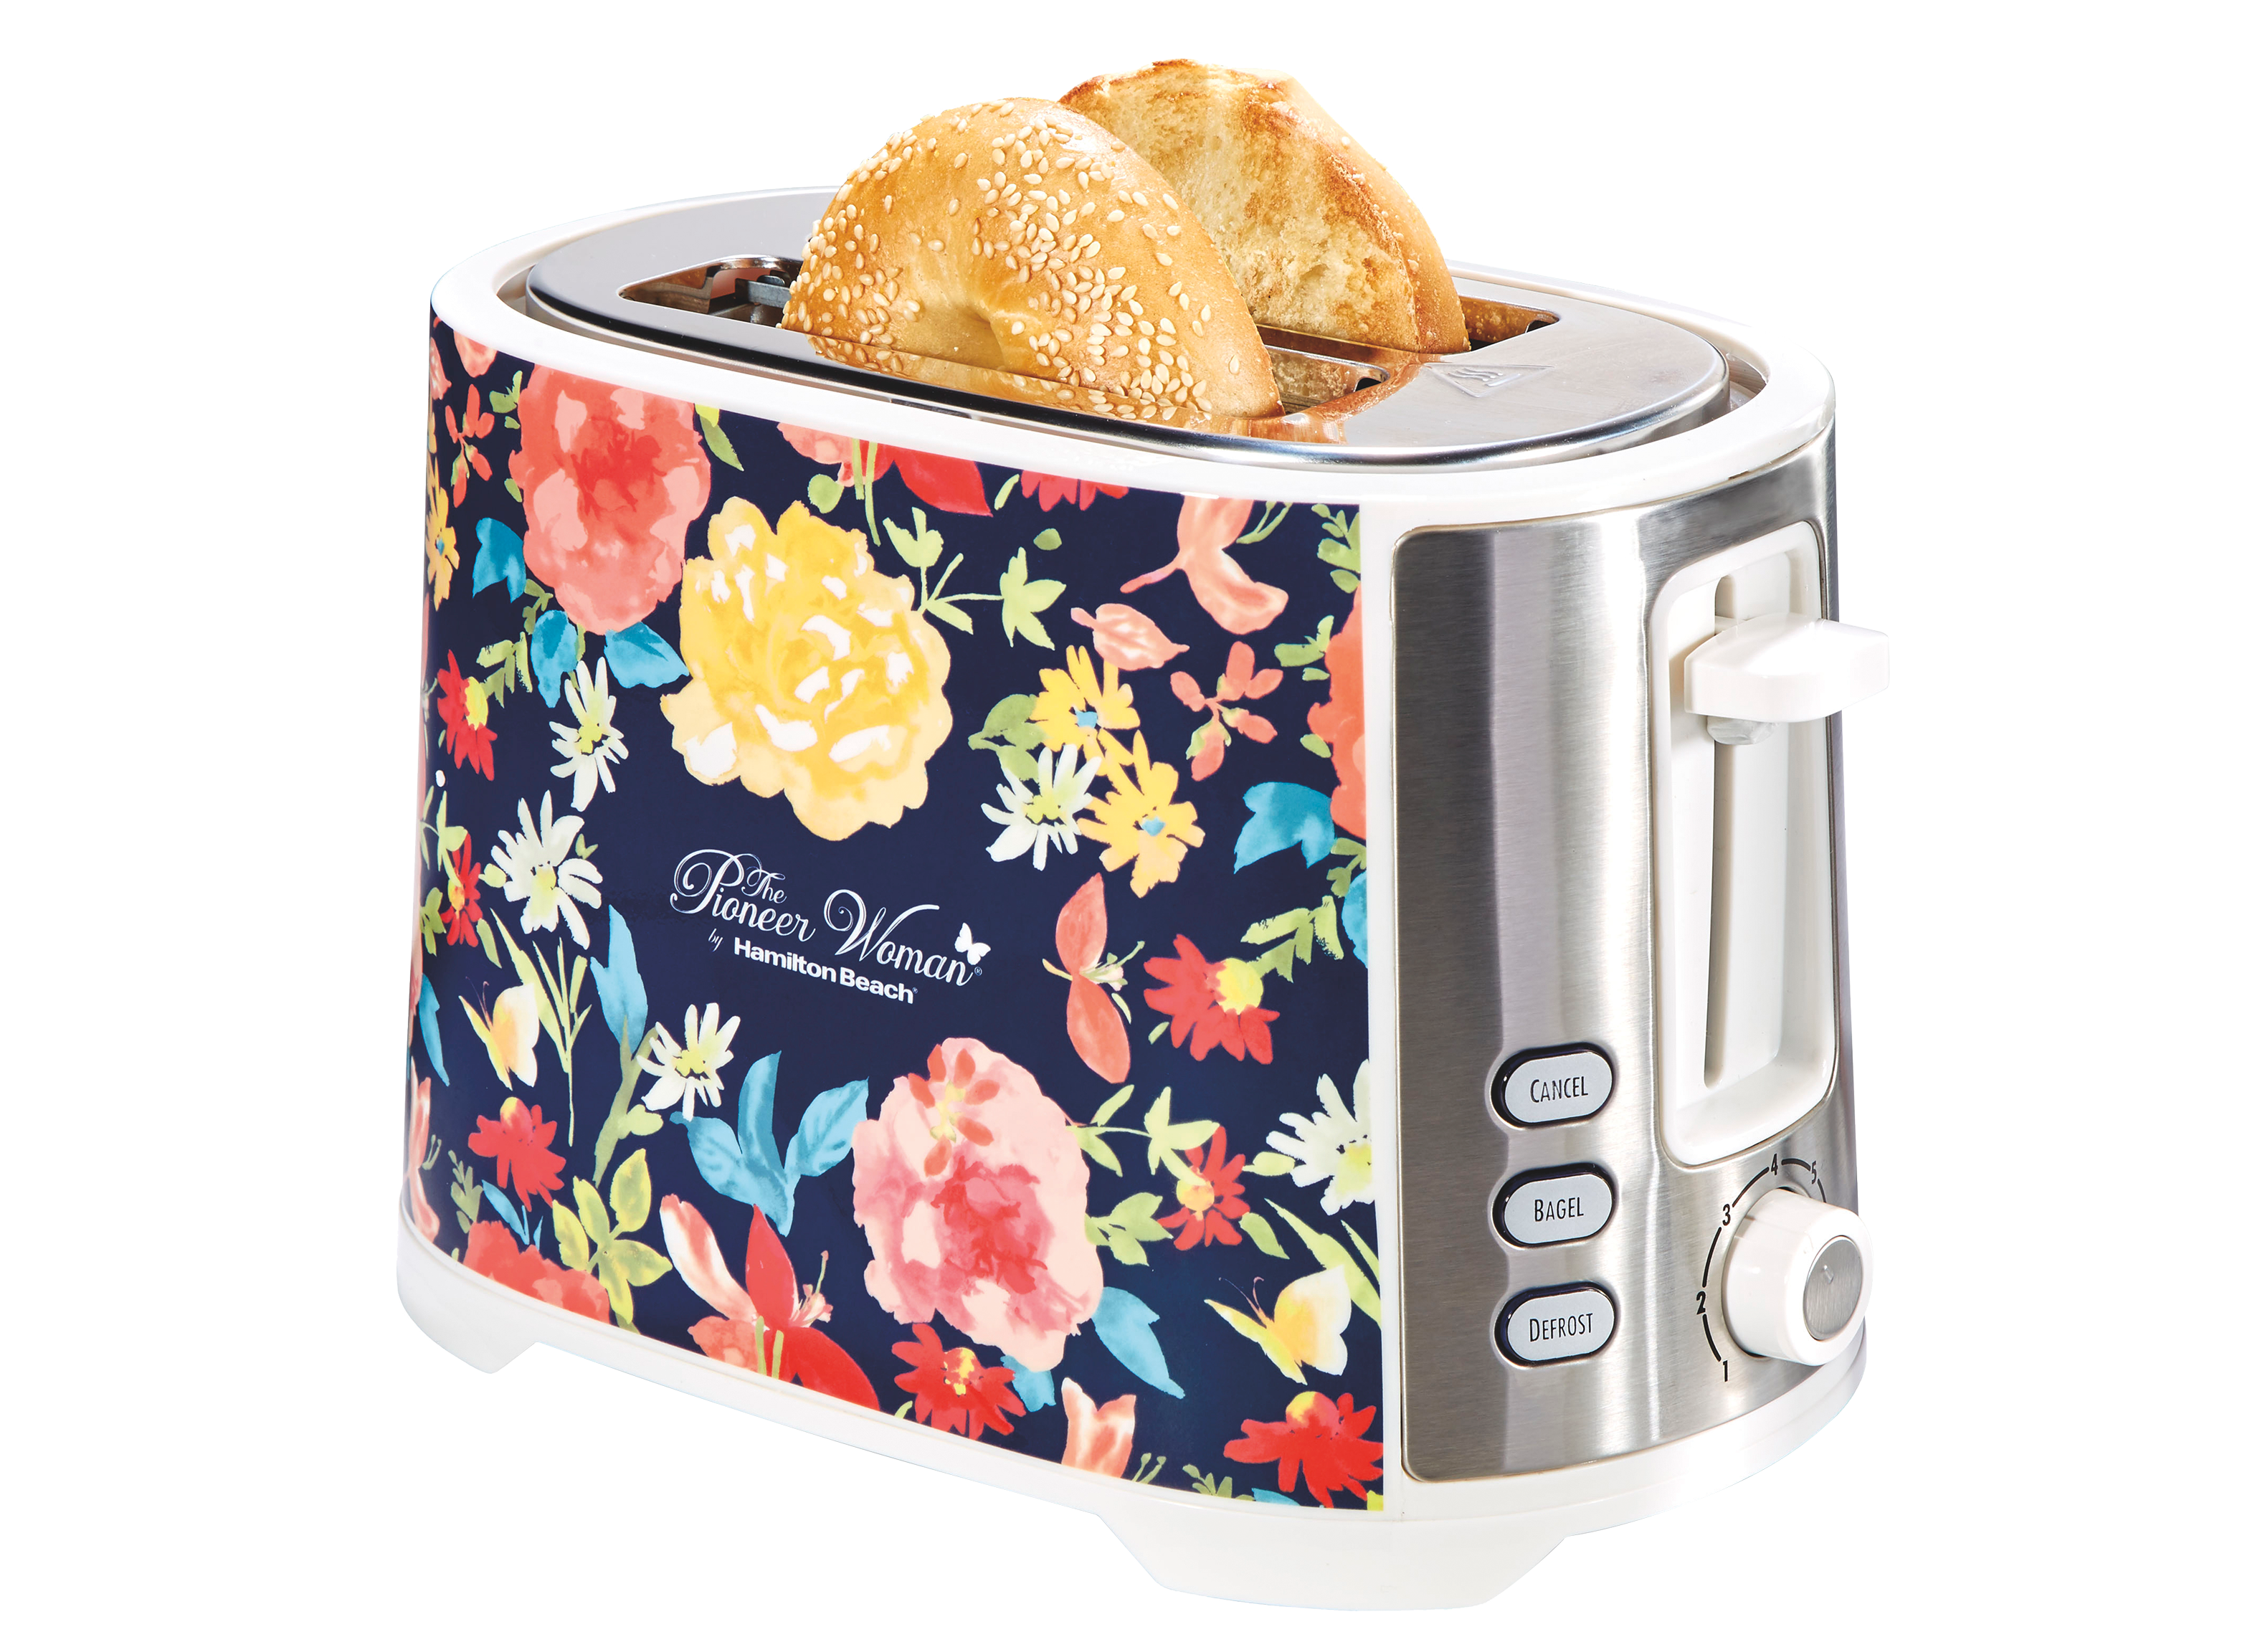 https://crdms.images.consumerreports.org/prod/products/cr/models/397401-toasters-pioneer-woman-fiona-floral-22638-by-hamilton-beach-10002205.png